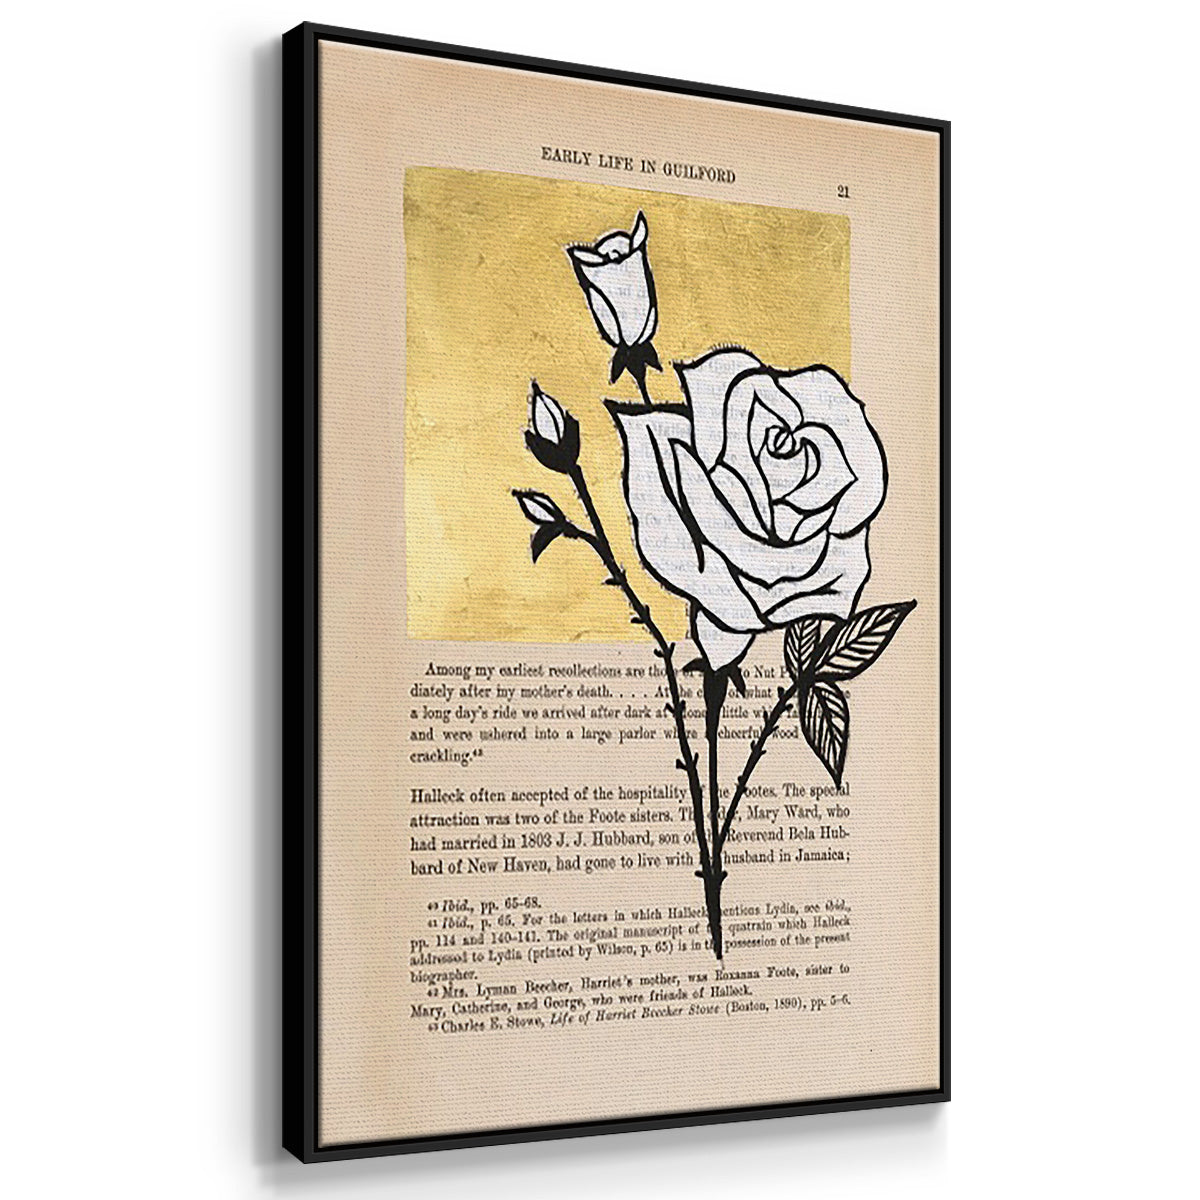 Floral Diary I - Framed Premium Gallery Wrapped Canvas L Frame 3 Piece Set - Ready to Hang